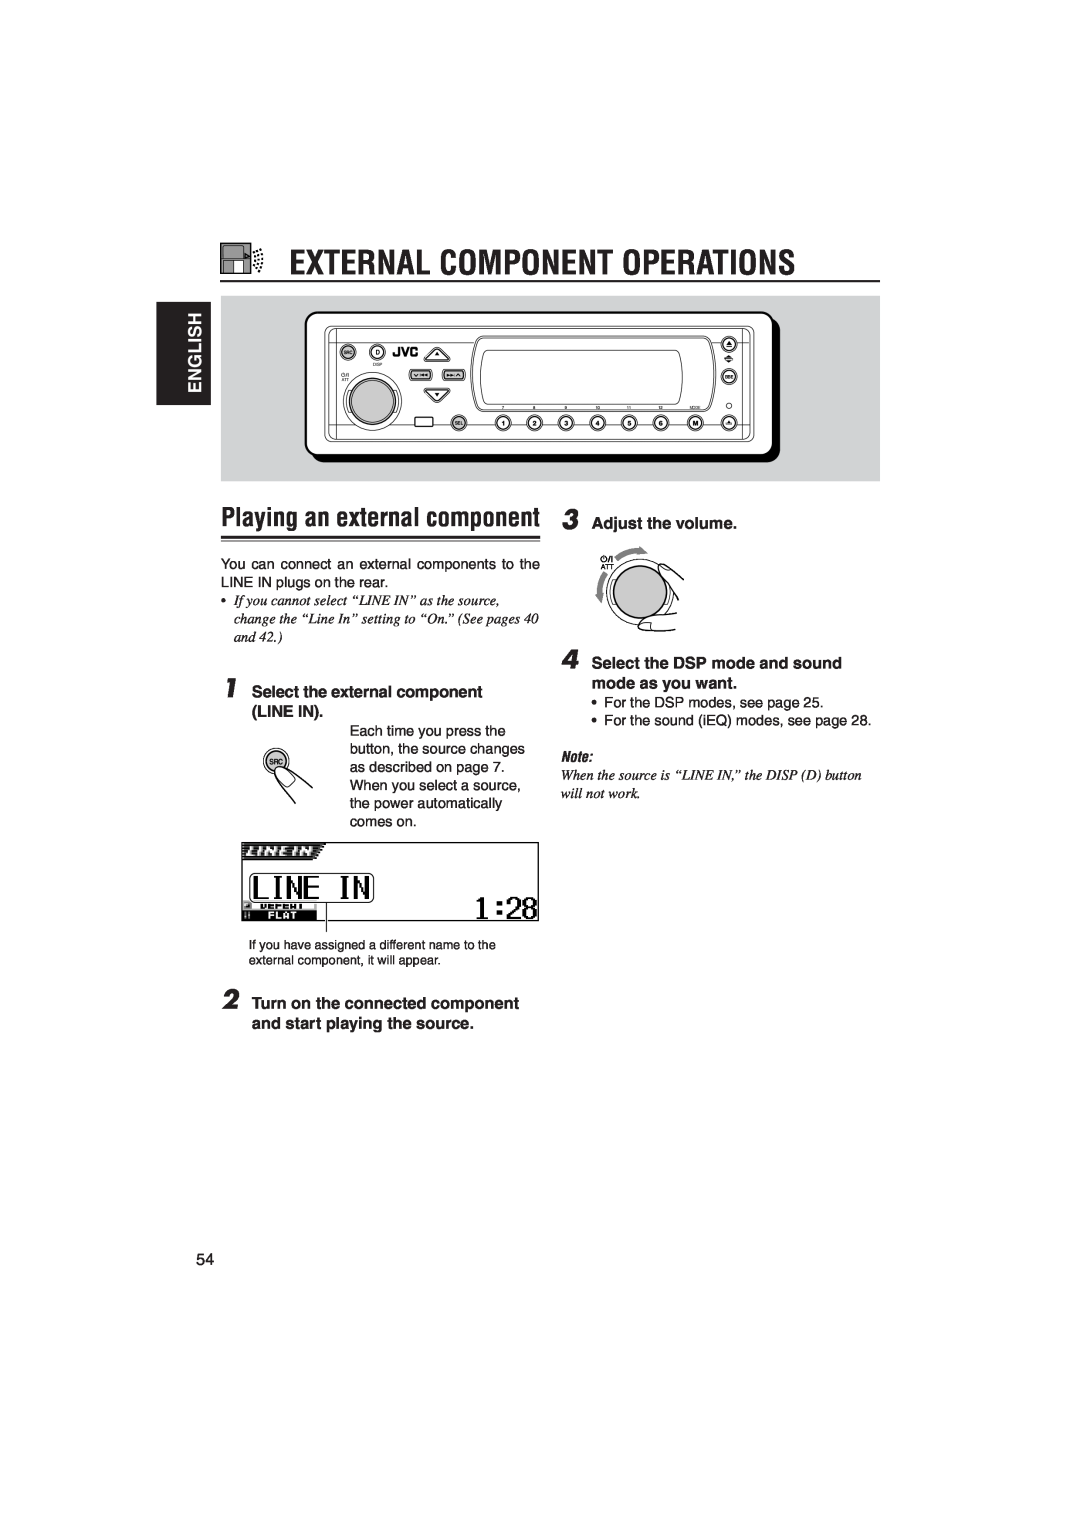 JVC KD-SH9105 manual External Component Operations, Playing an external component 3 Adjust the volume, English 